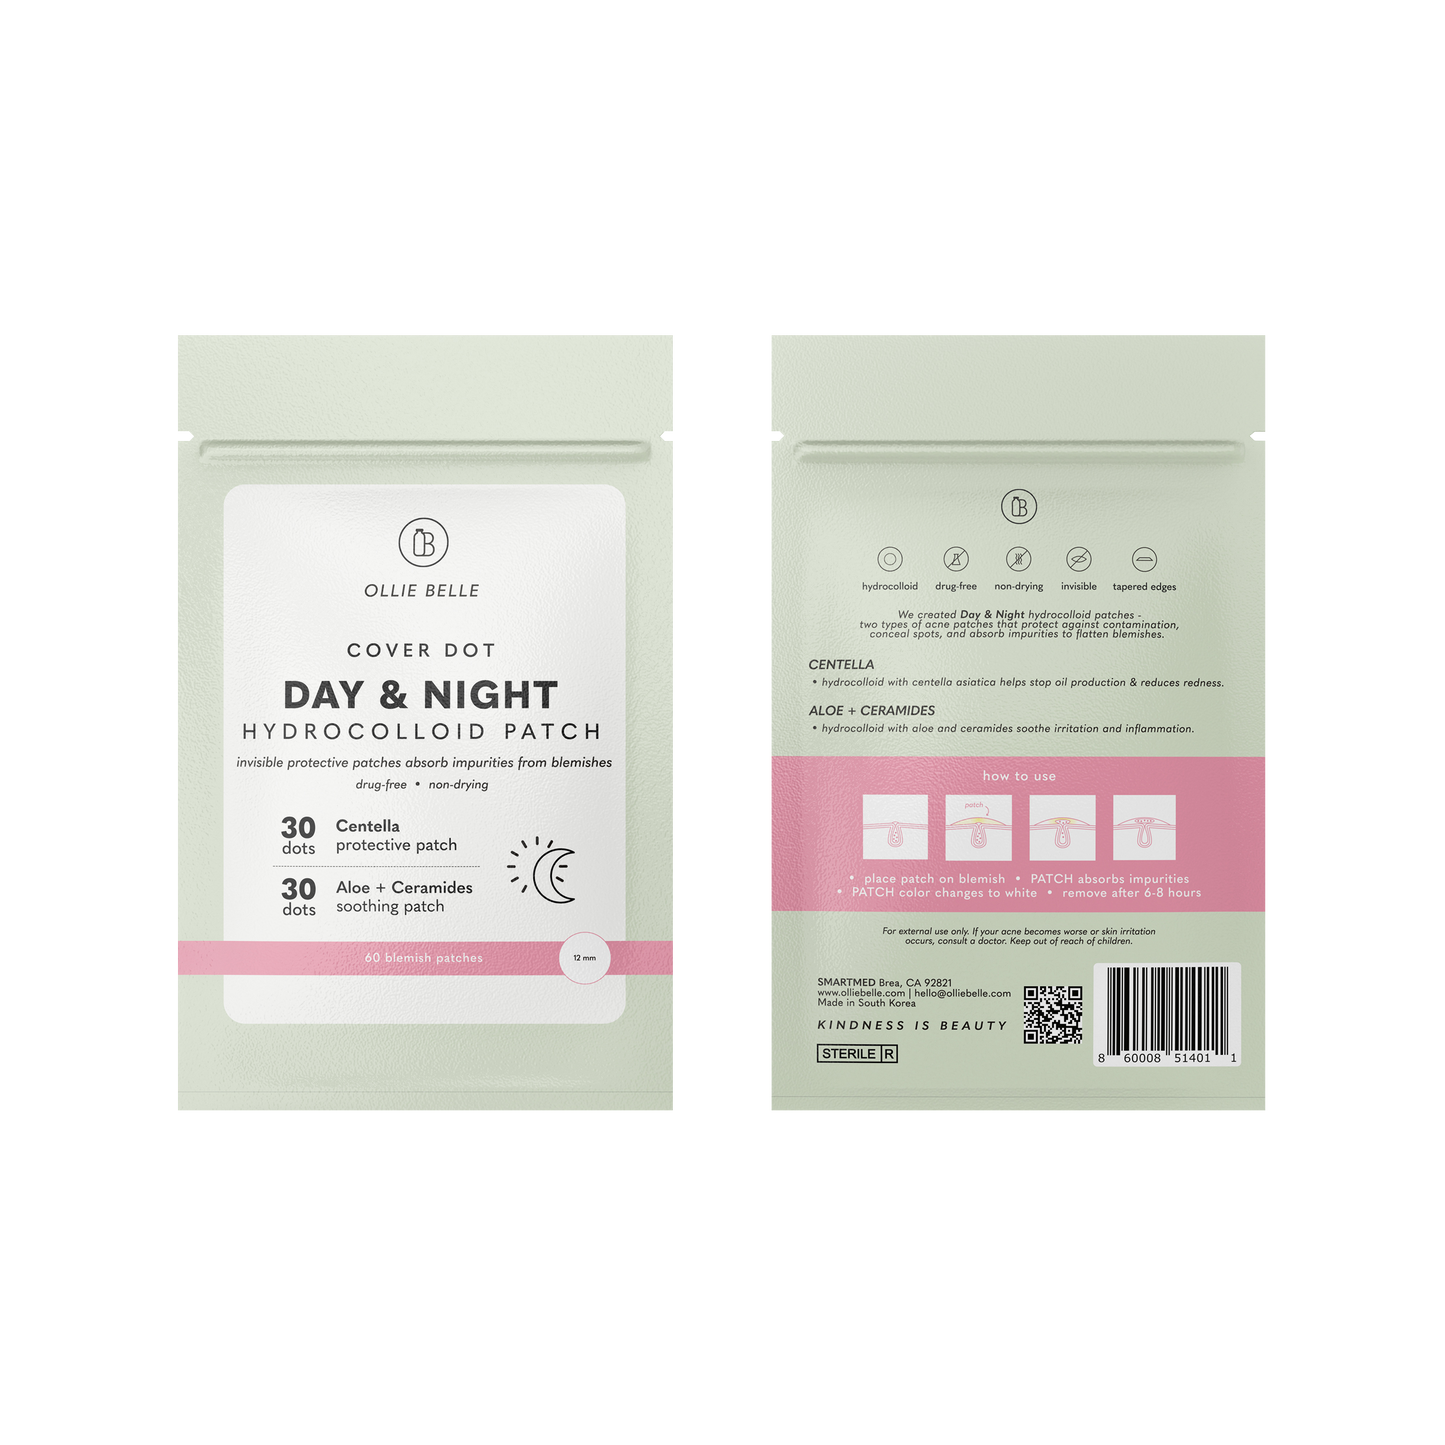 60 Hydrocolloid Acne Patches with Aloe Centella Protective & Soothing Patches Cover Dot Day & Night Patch